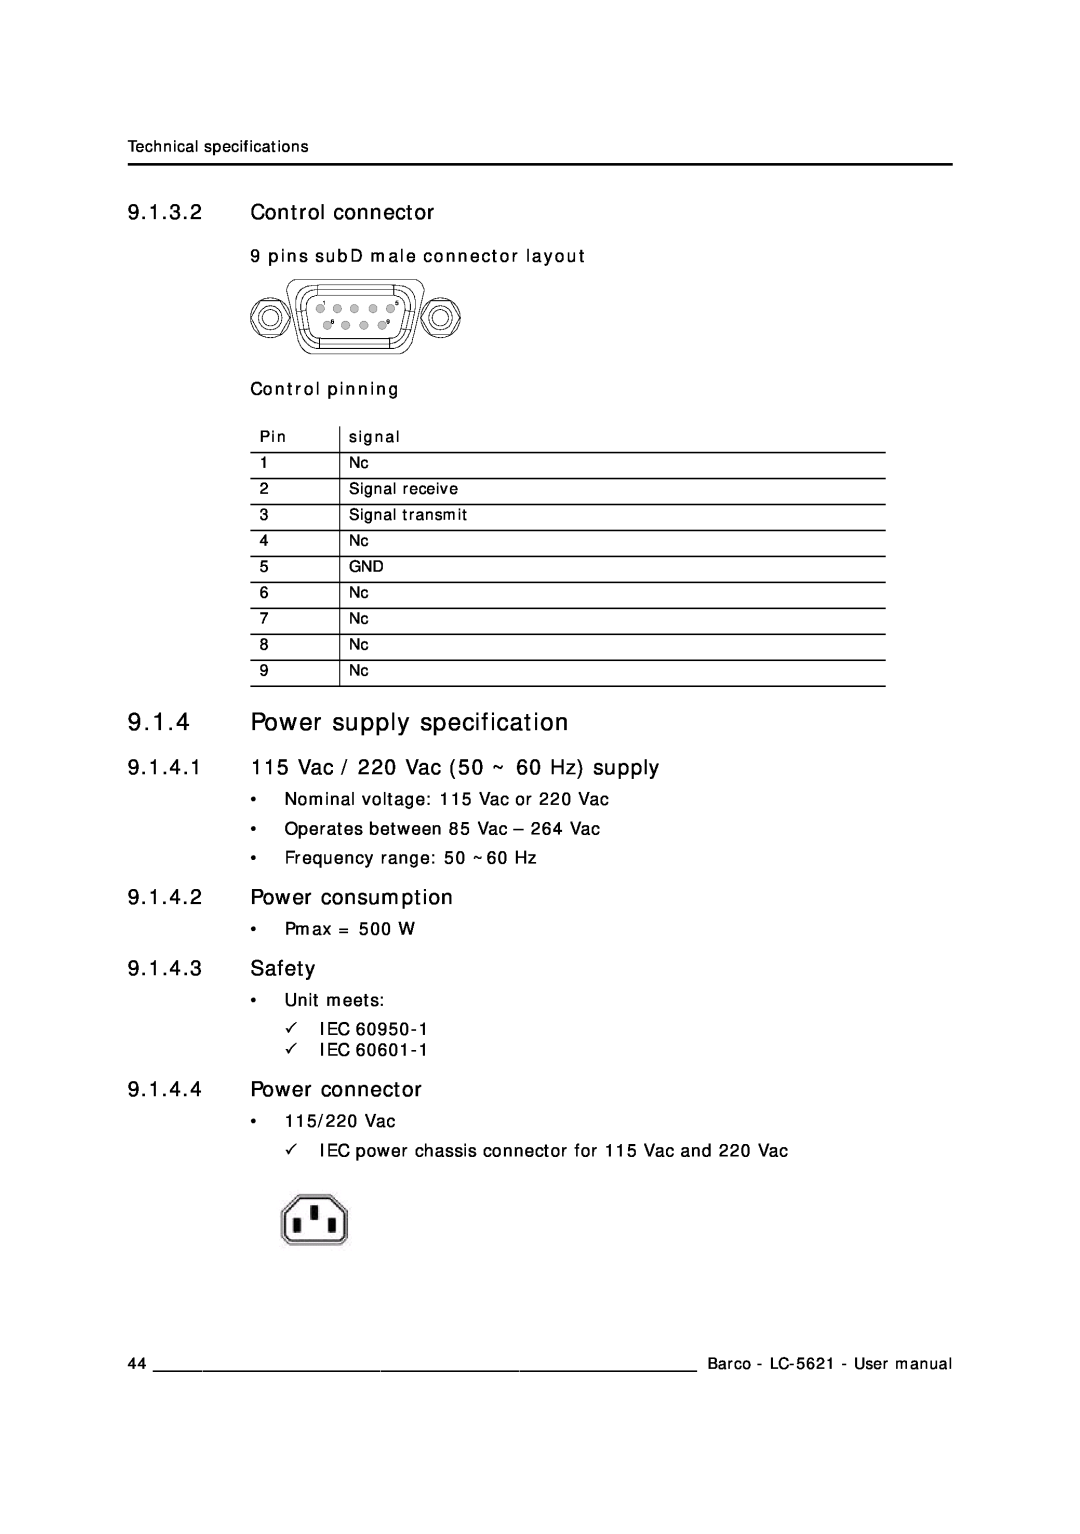 Barco LC-5621 Power supply specification, Control connector, 9.1.4.1 115 Vac / 220 Vac 50 ~ 60 Hz supply, Safety 